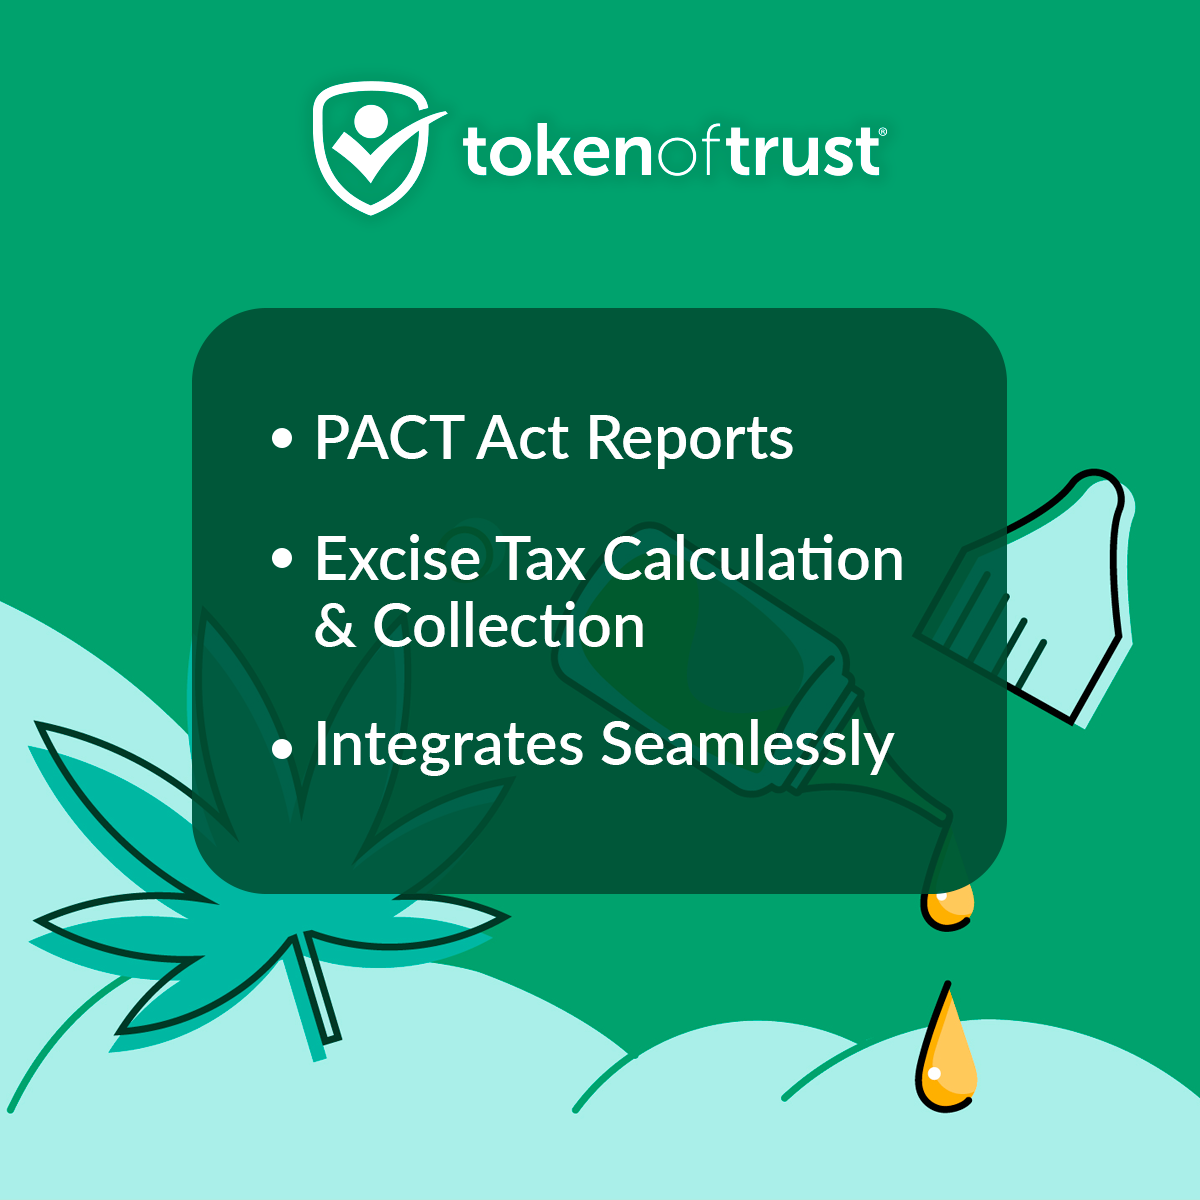 Save up to 90% on PACT Act & Excise Tax Compliance Packages from Token of Trust 303